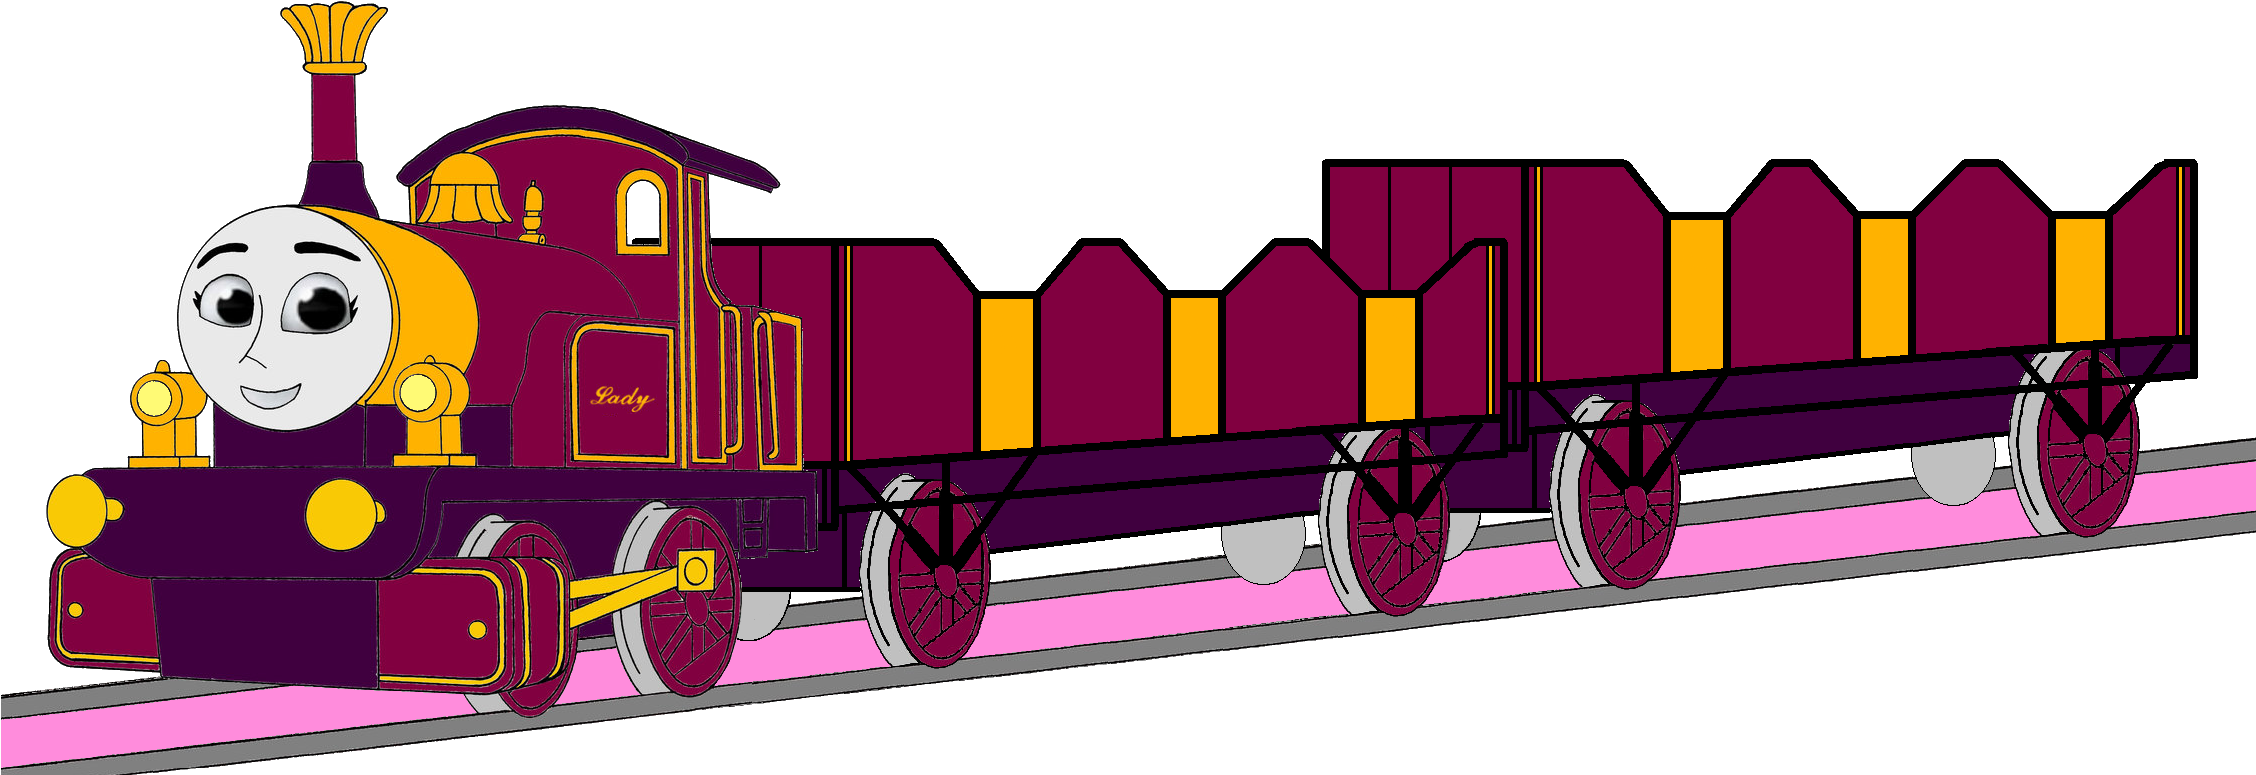 Thomas The Tank Engine Images Lady With Her Double - Open Railway Carriage (2255x810), Png Download